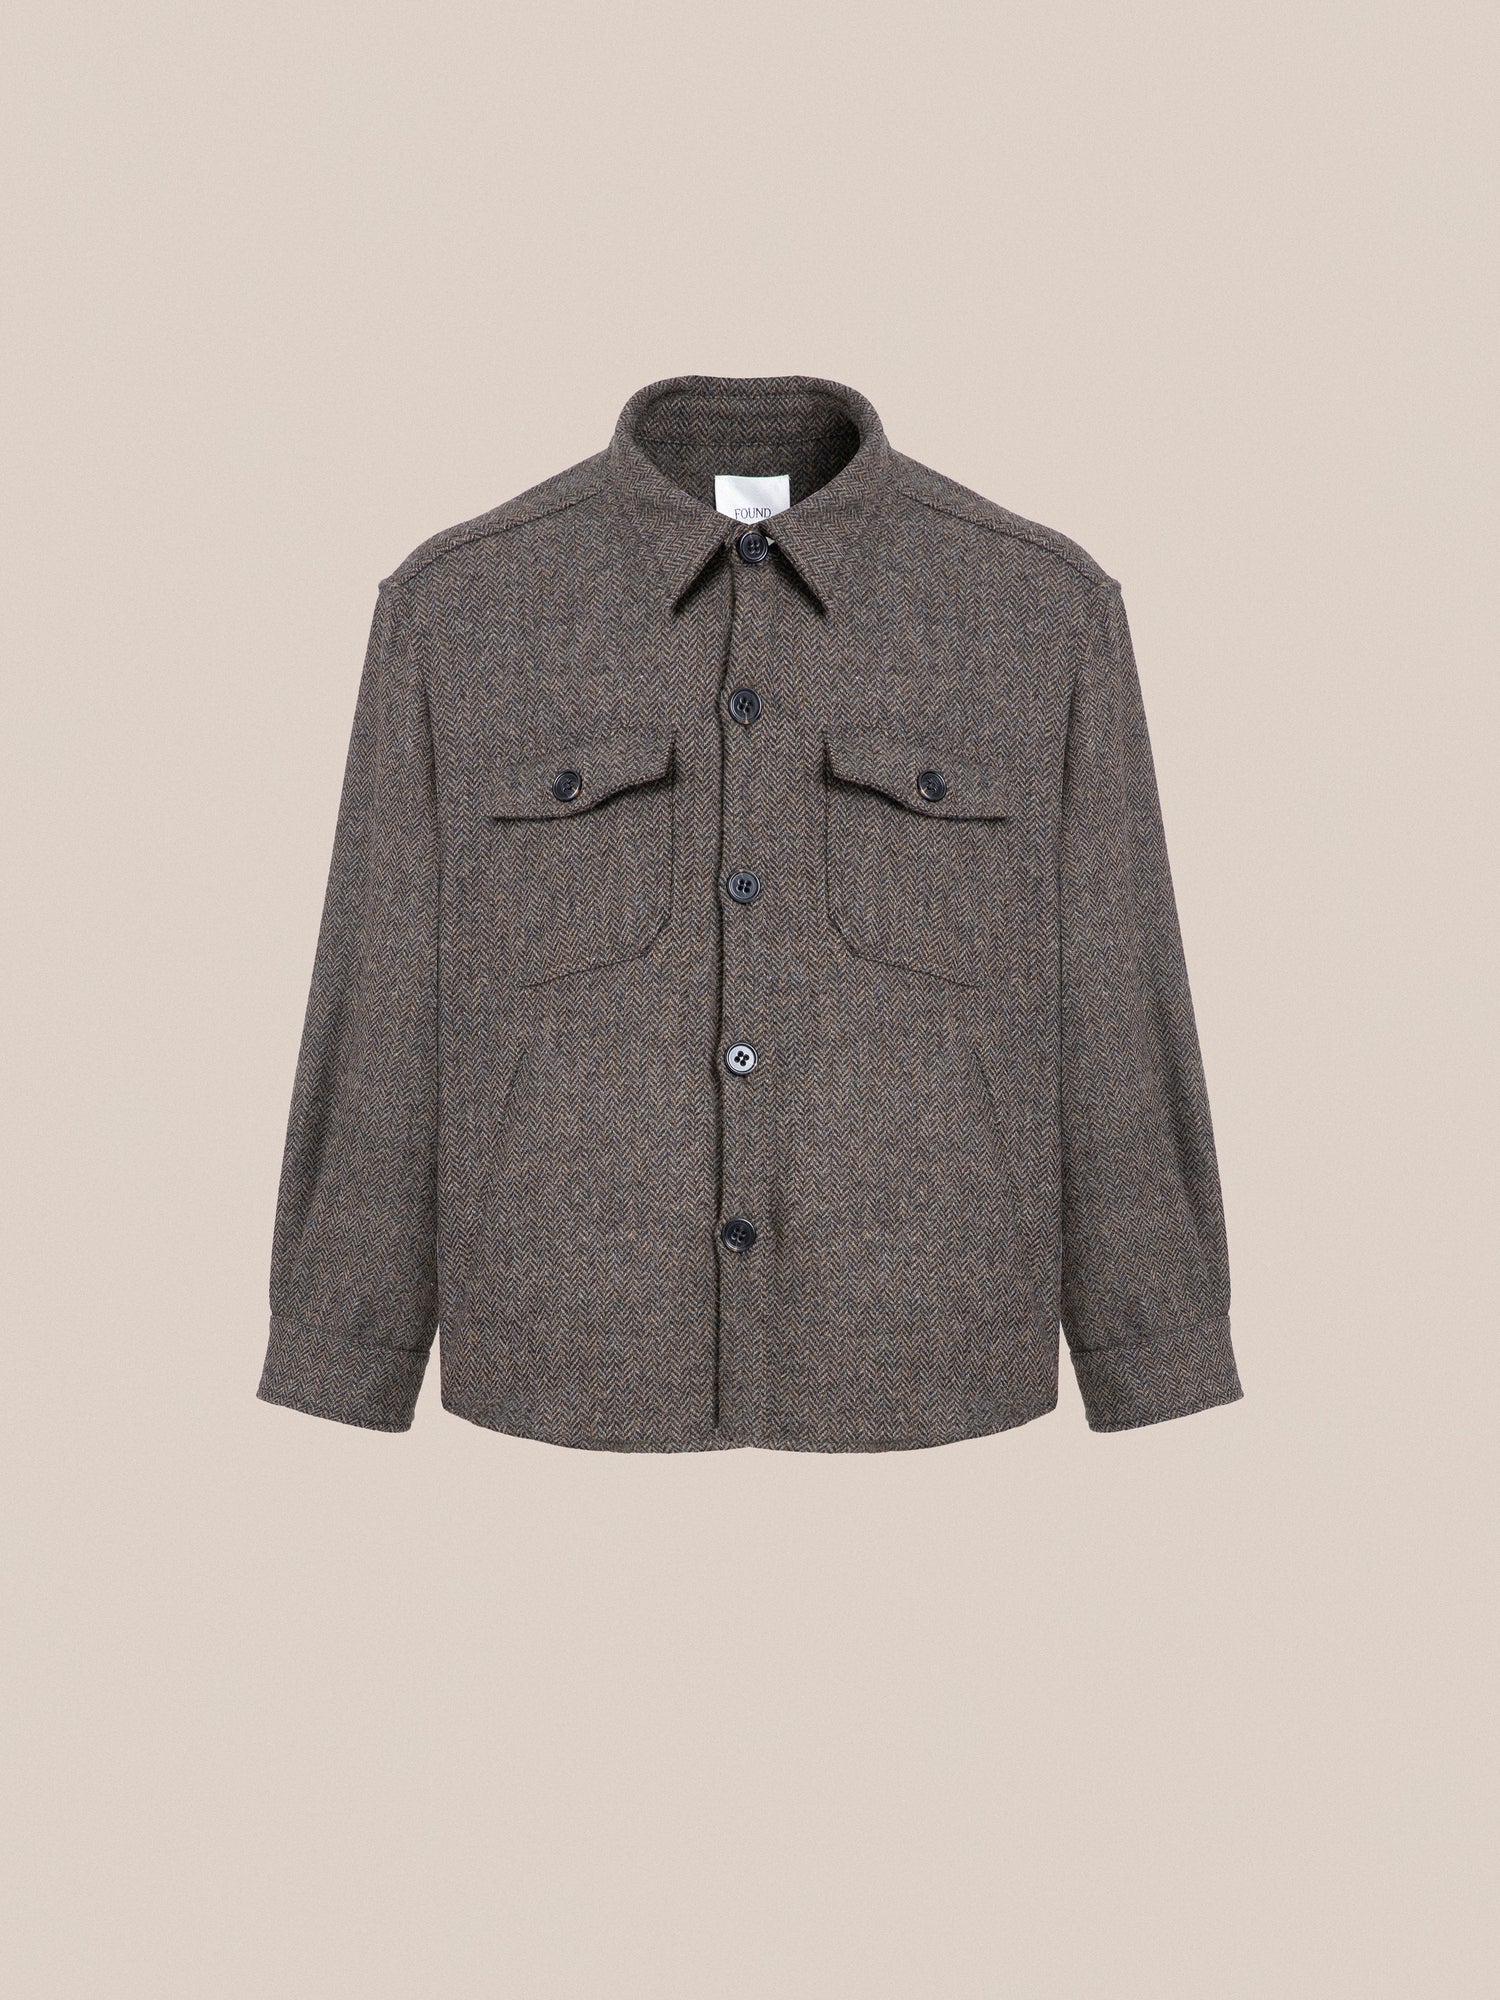 A Raven Herringbone Overshirt with buttons on the front, ideal for layering.